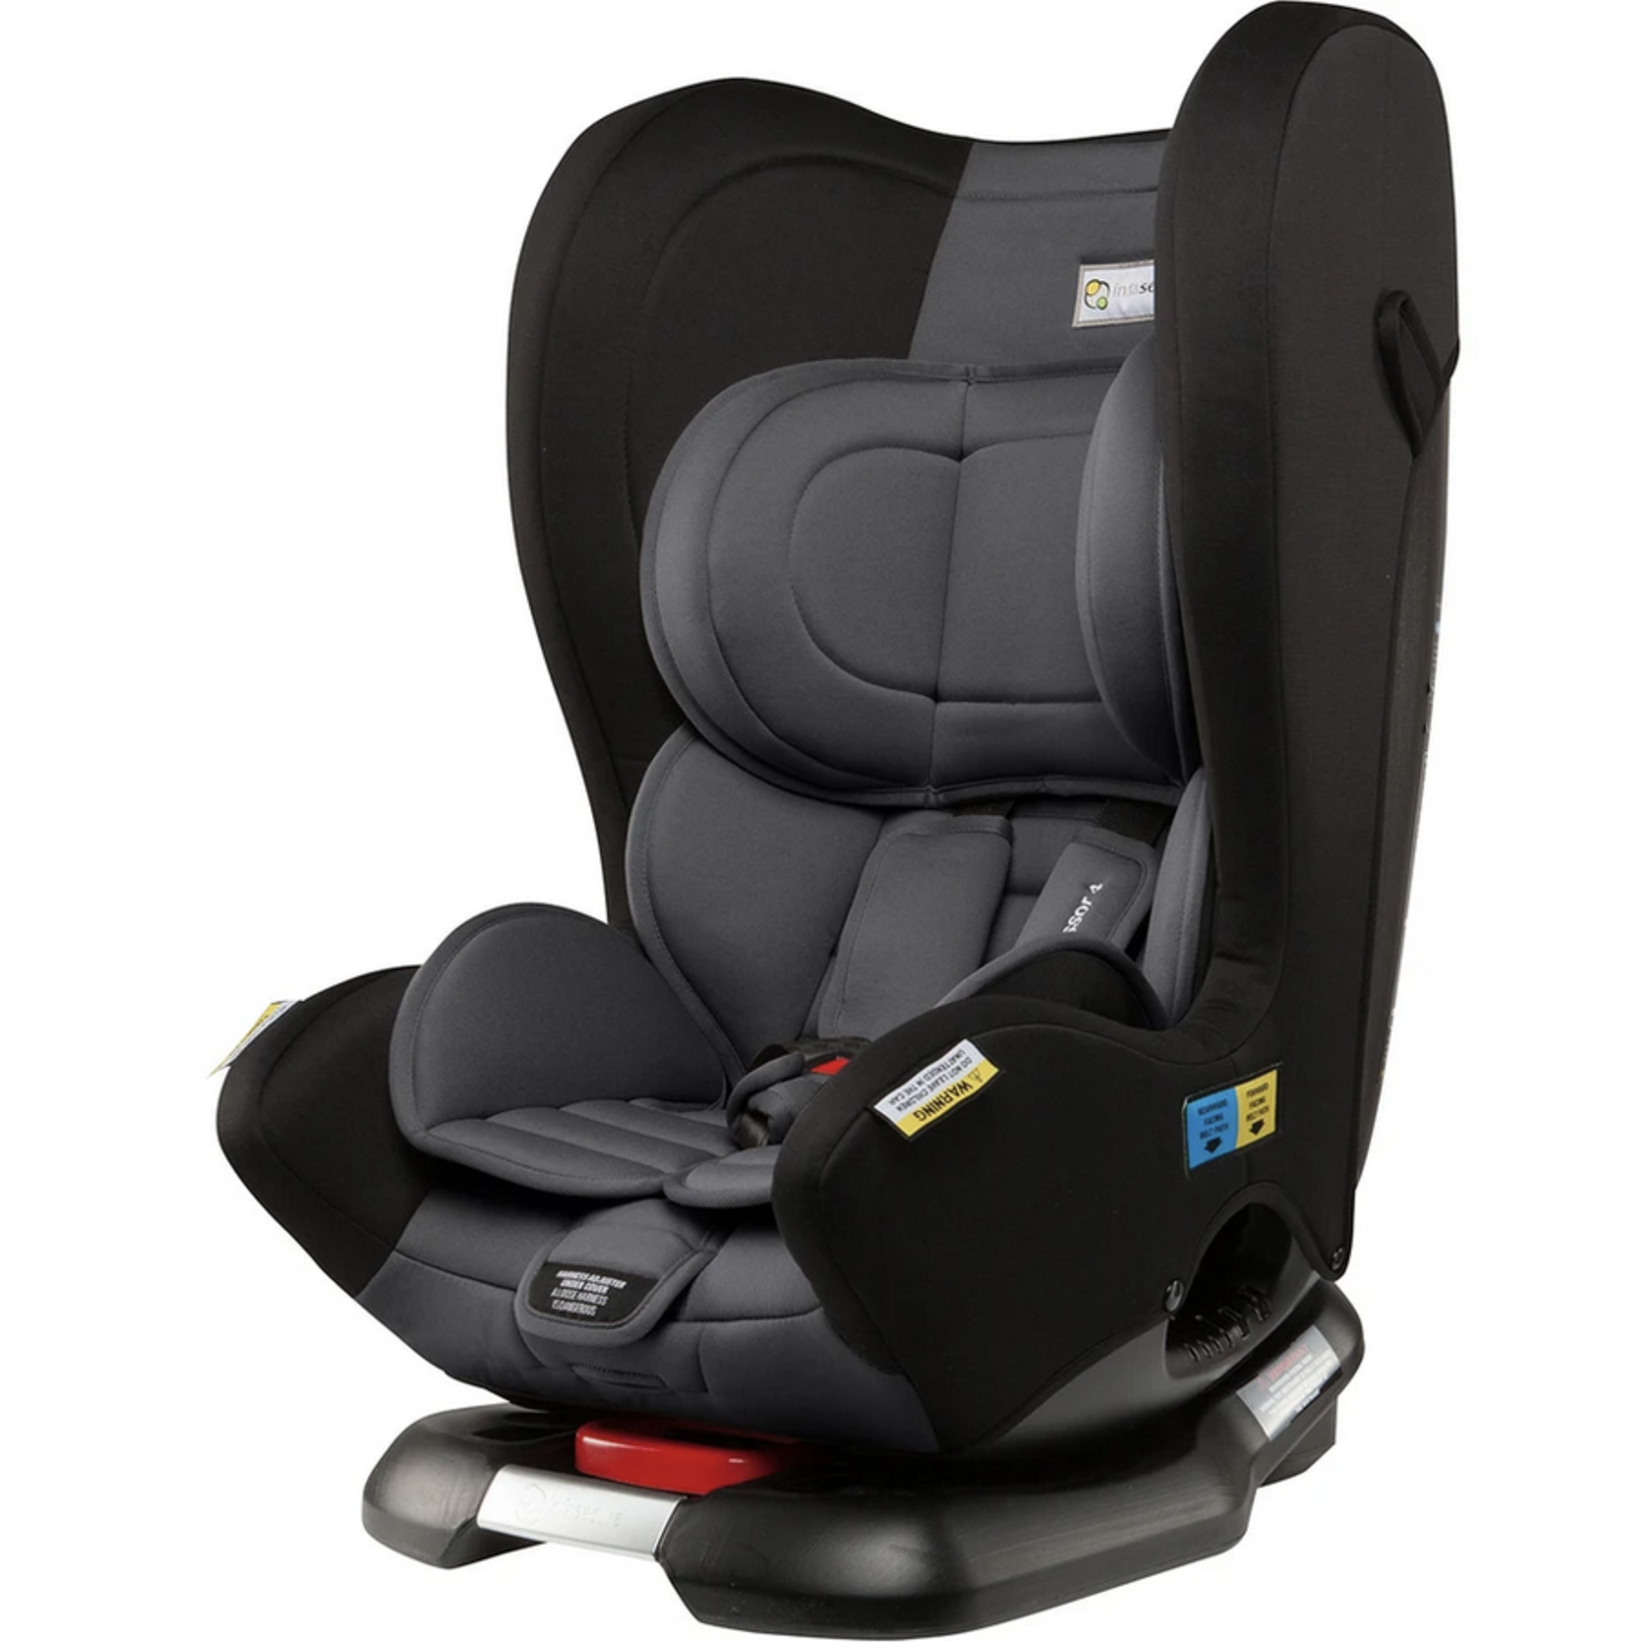 Infasecure Kompressor 4 Astra Isofix 0 to 4 years(2013)-Grey